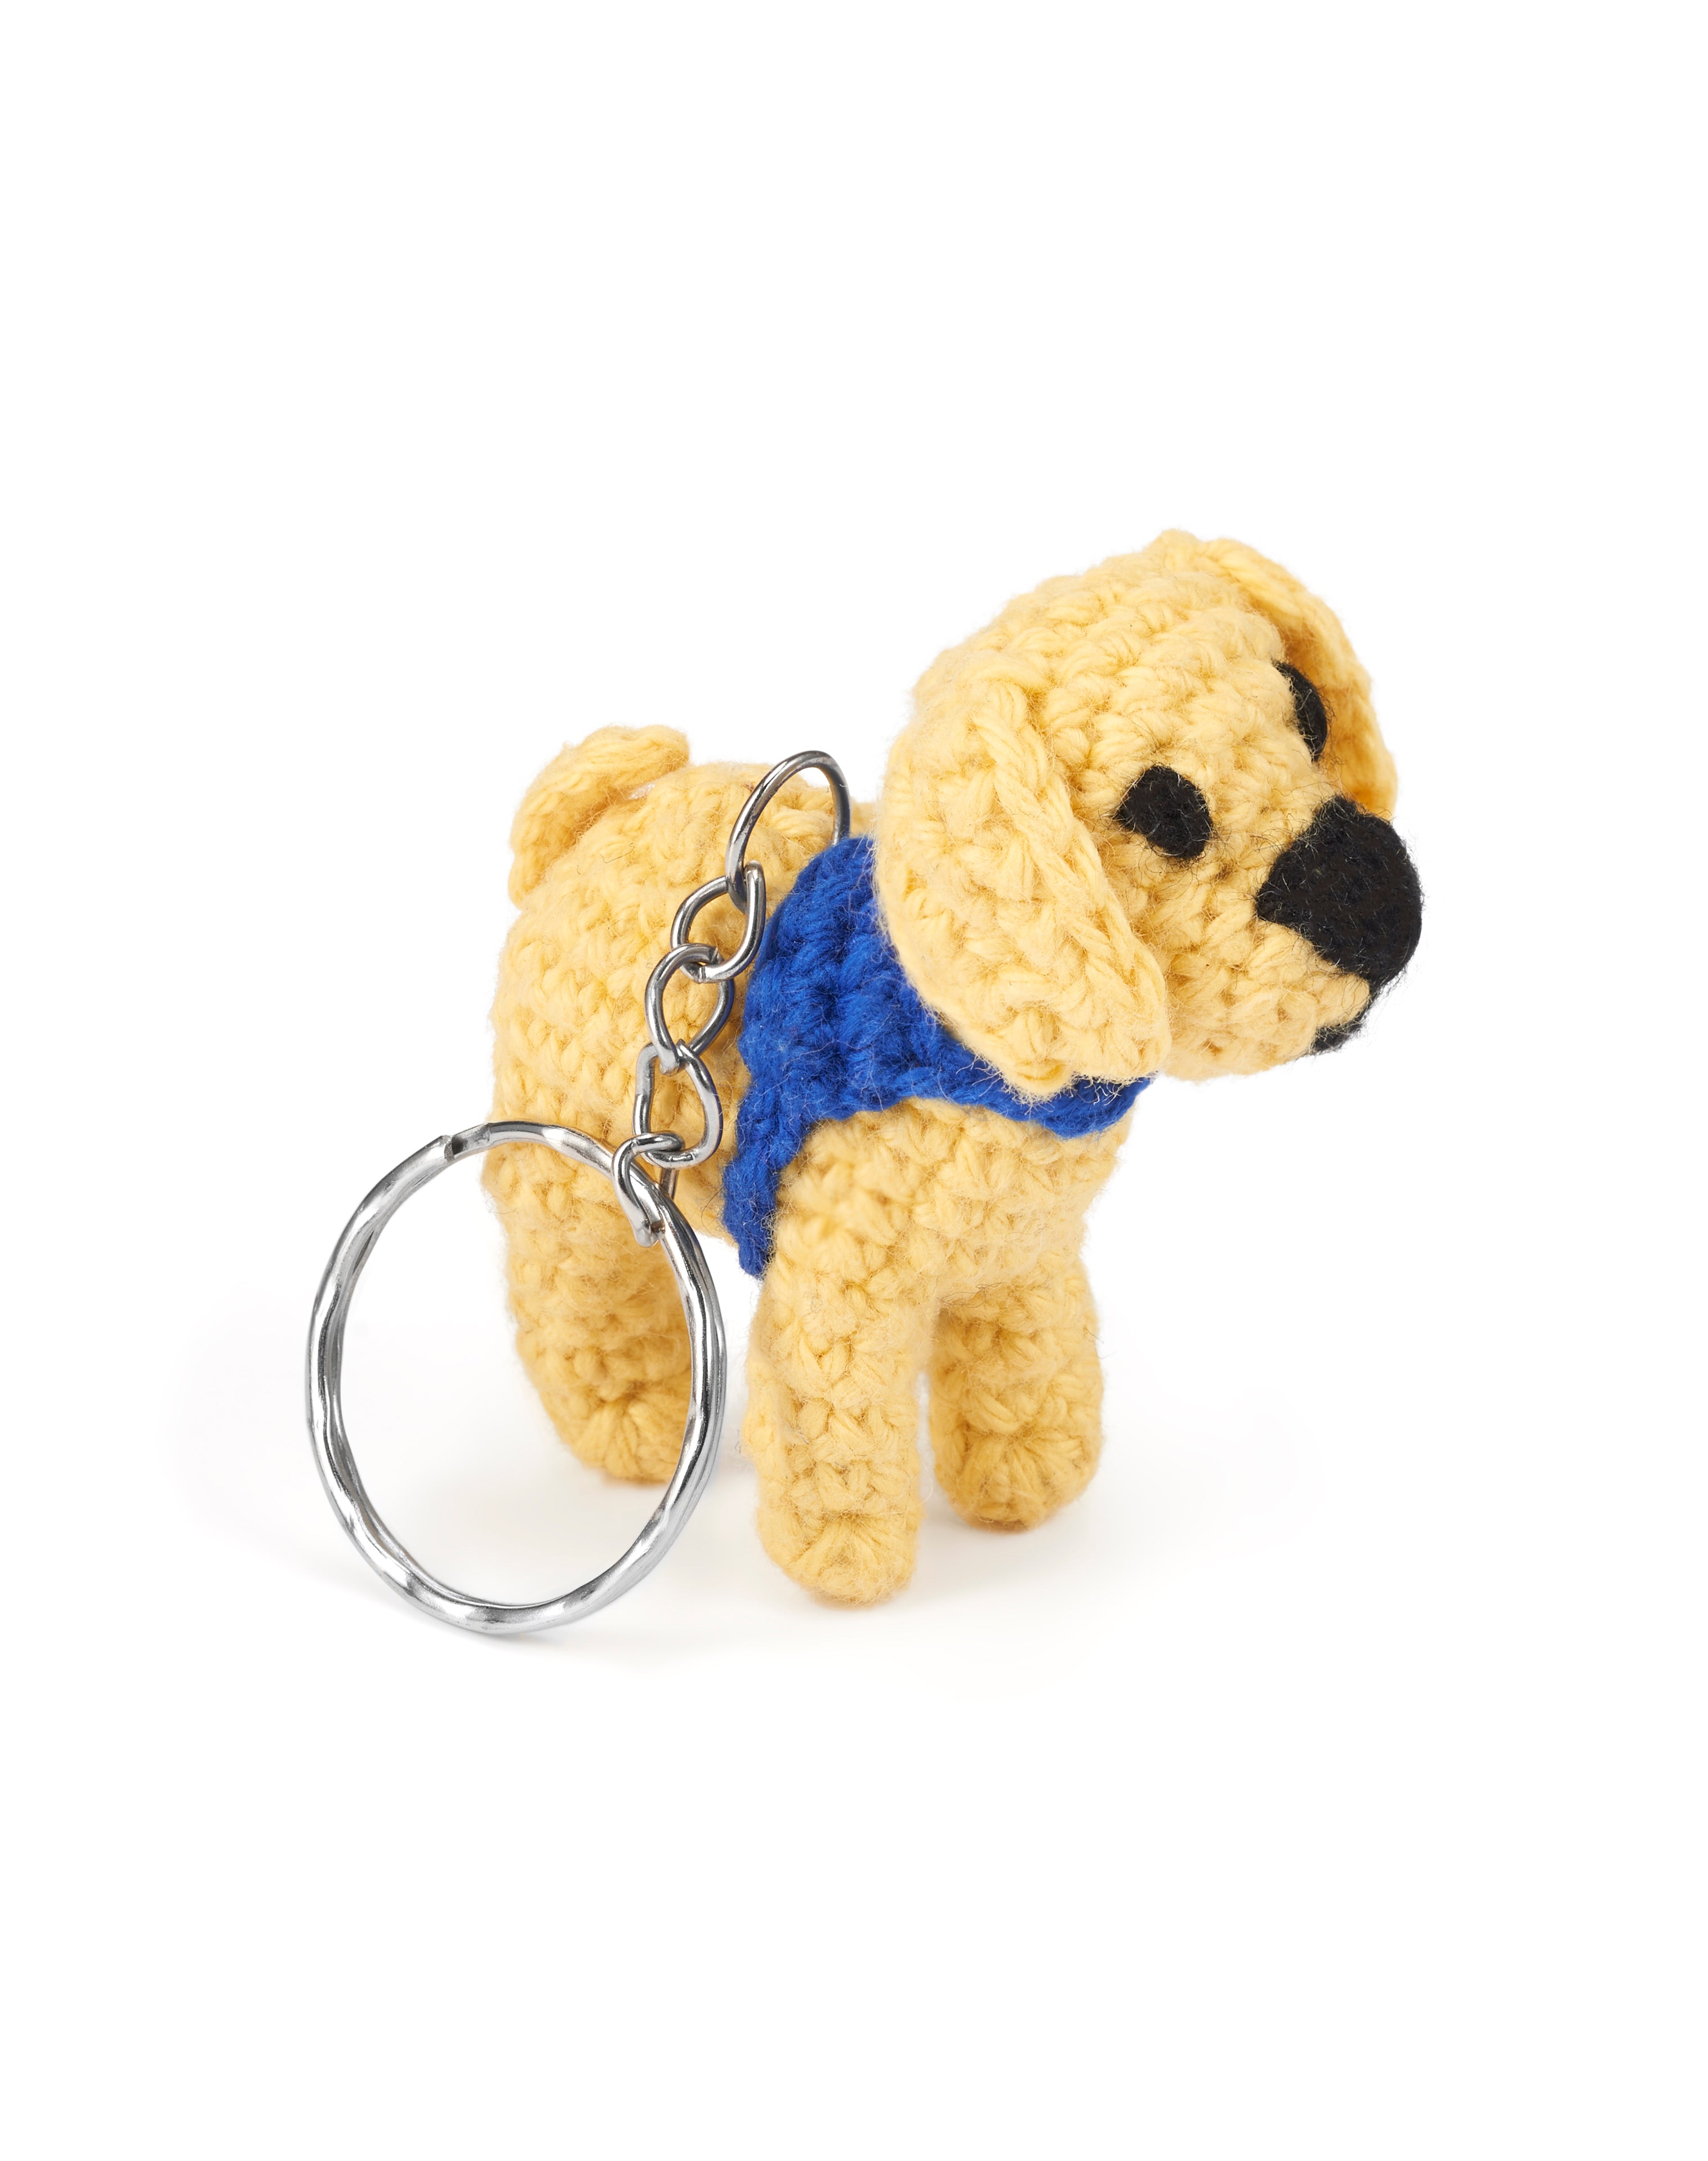 A crocheted yellow labrador wearing a blue dog coat on a metal keyring.